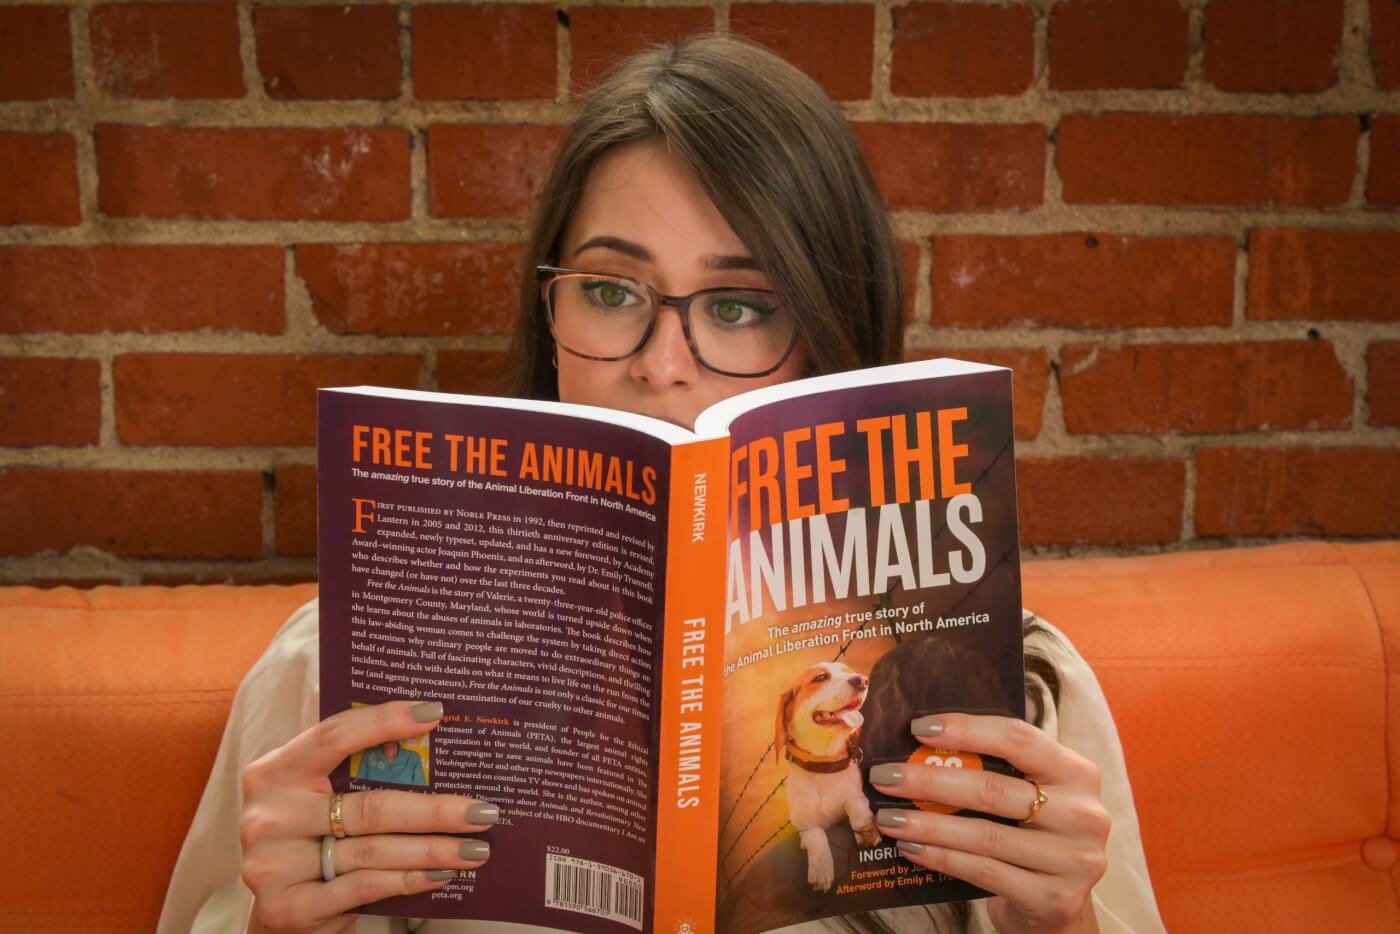 Free the animals on orange couch